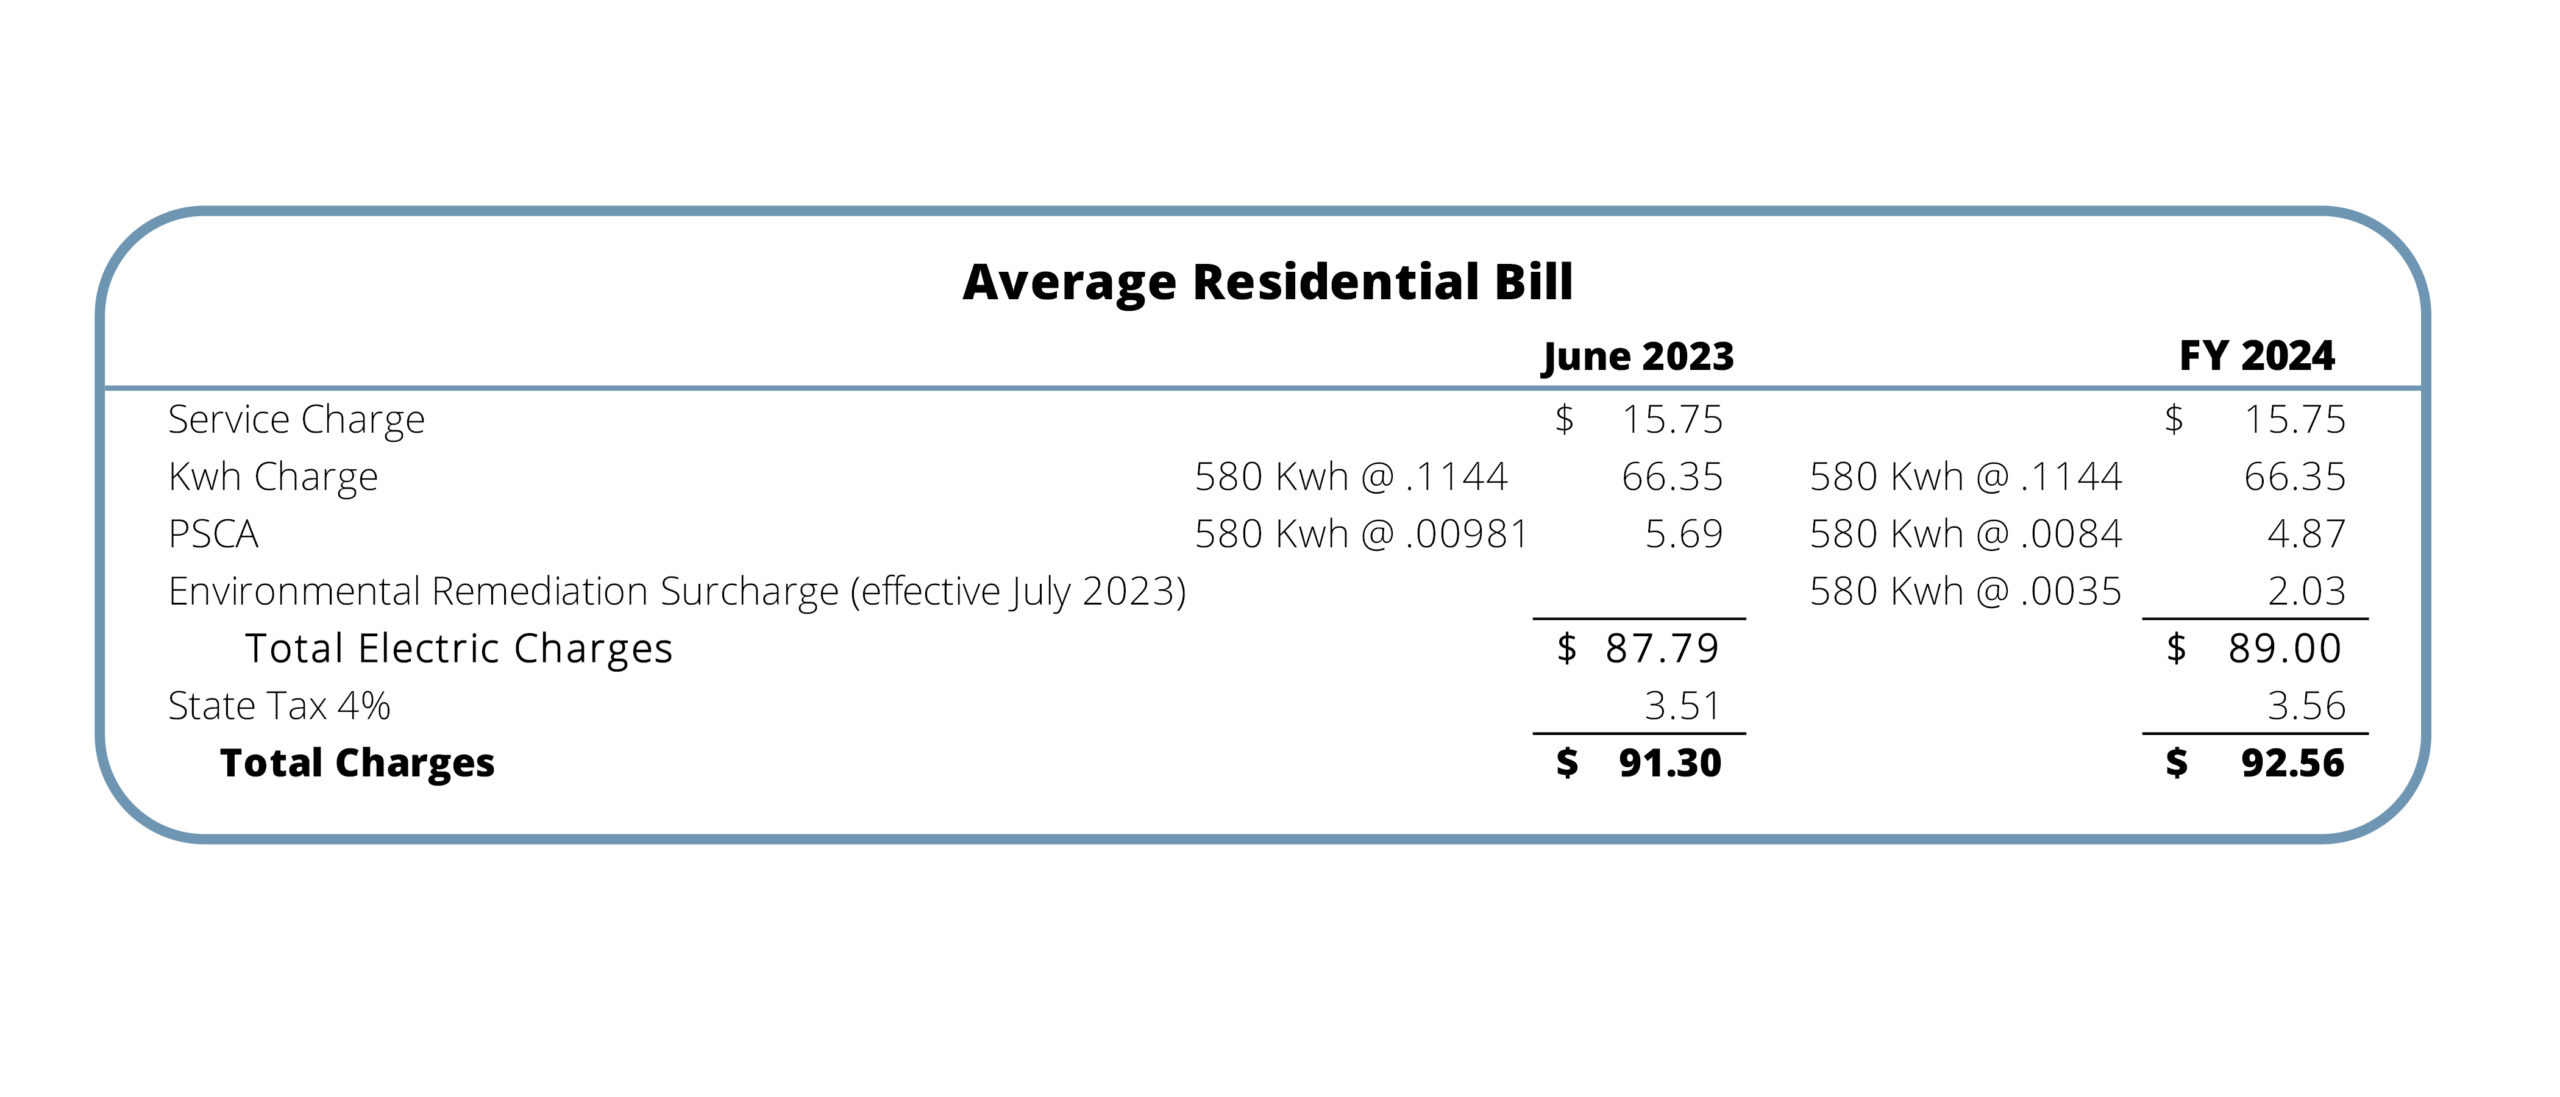 Residential rates from 2023 to 2024